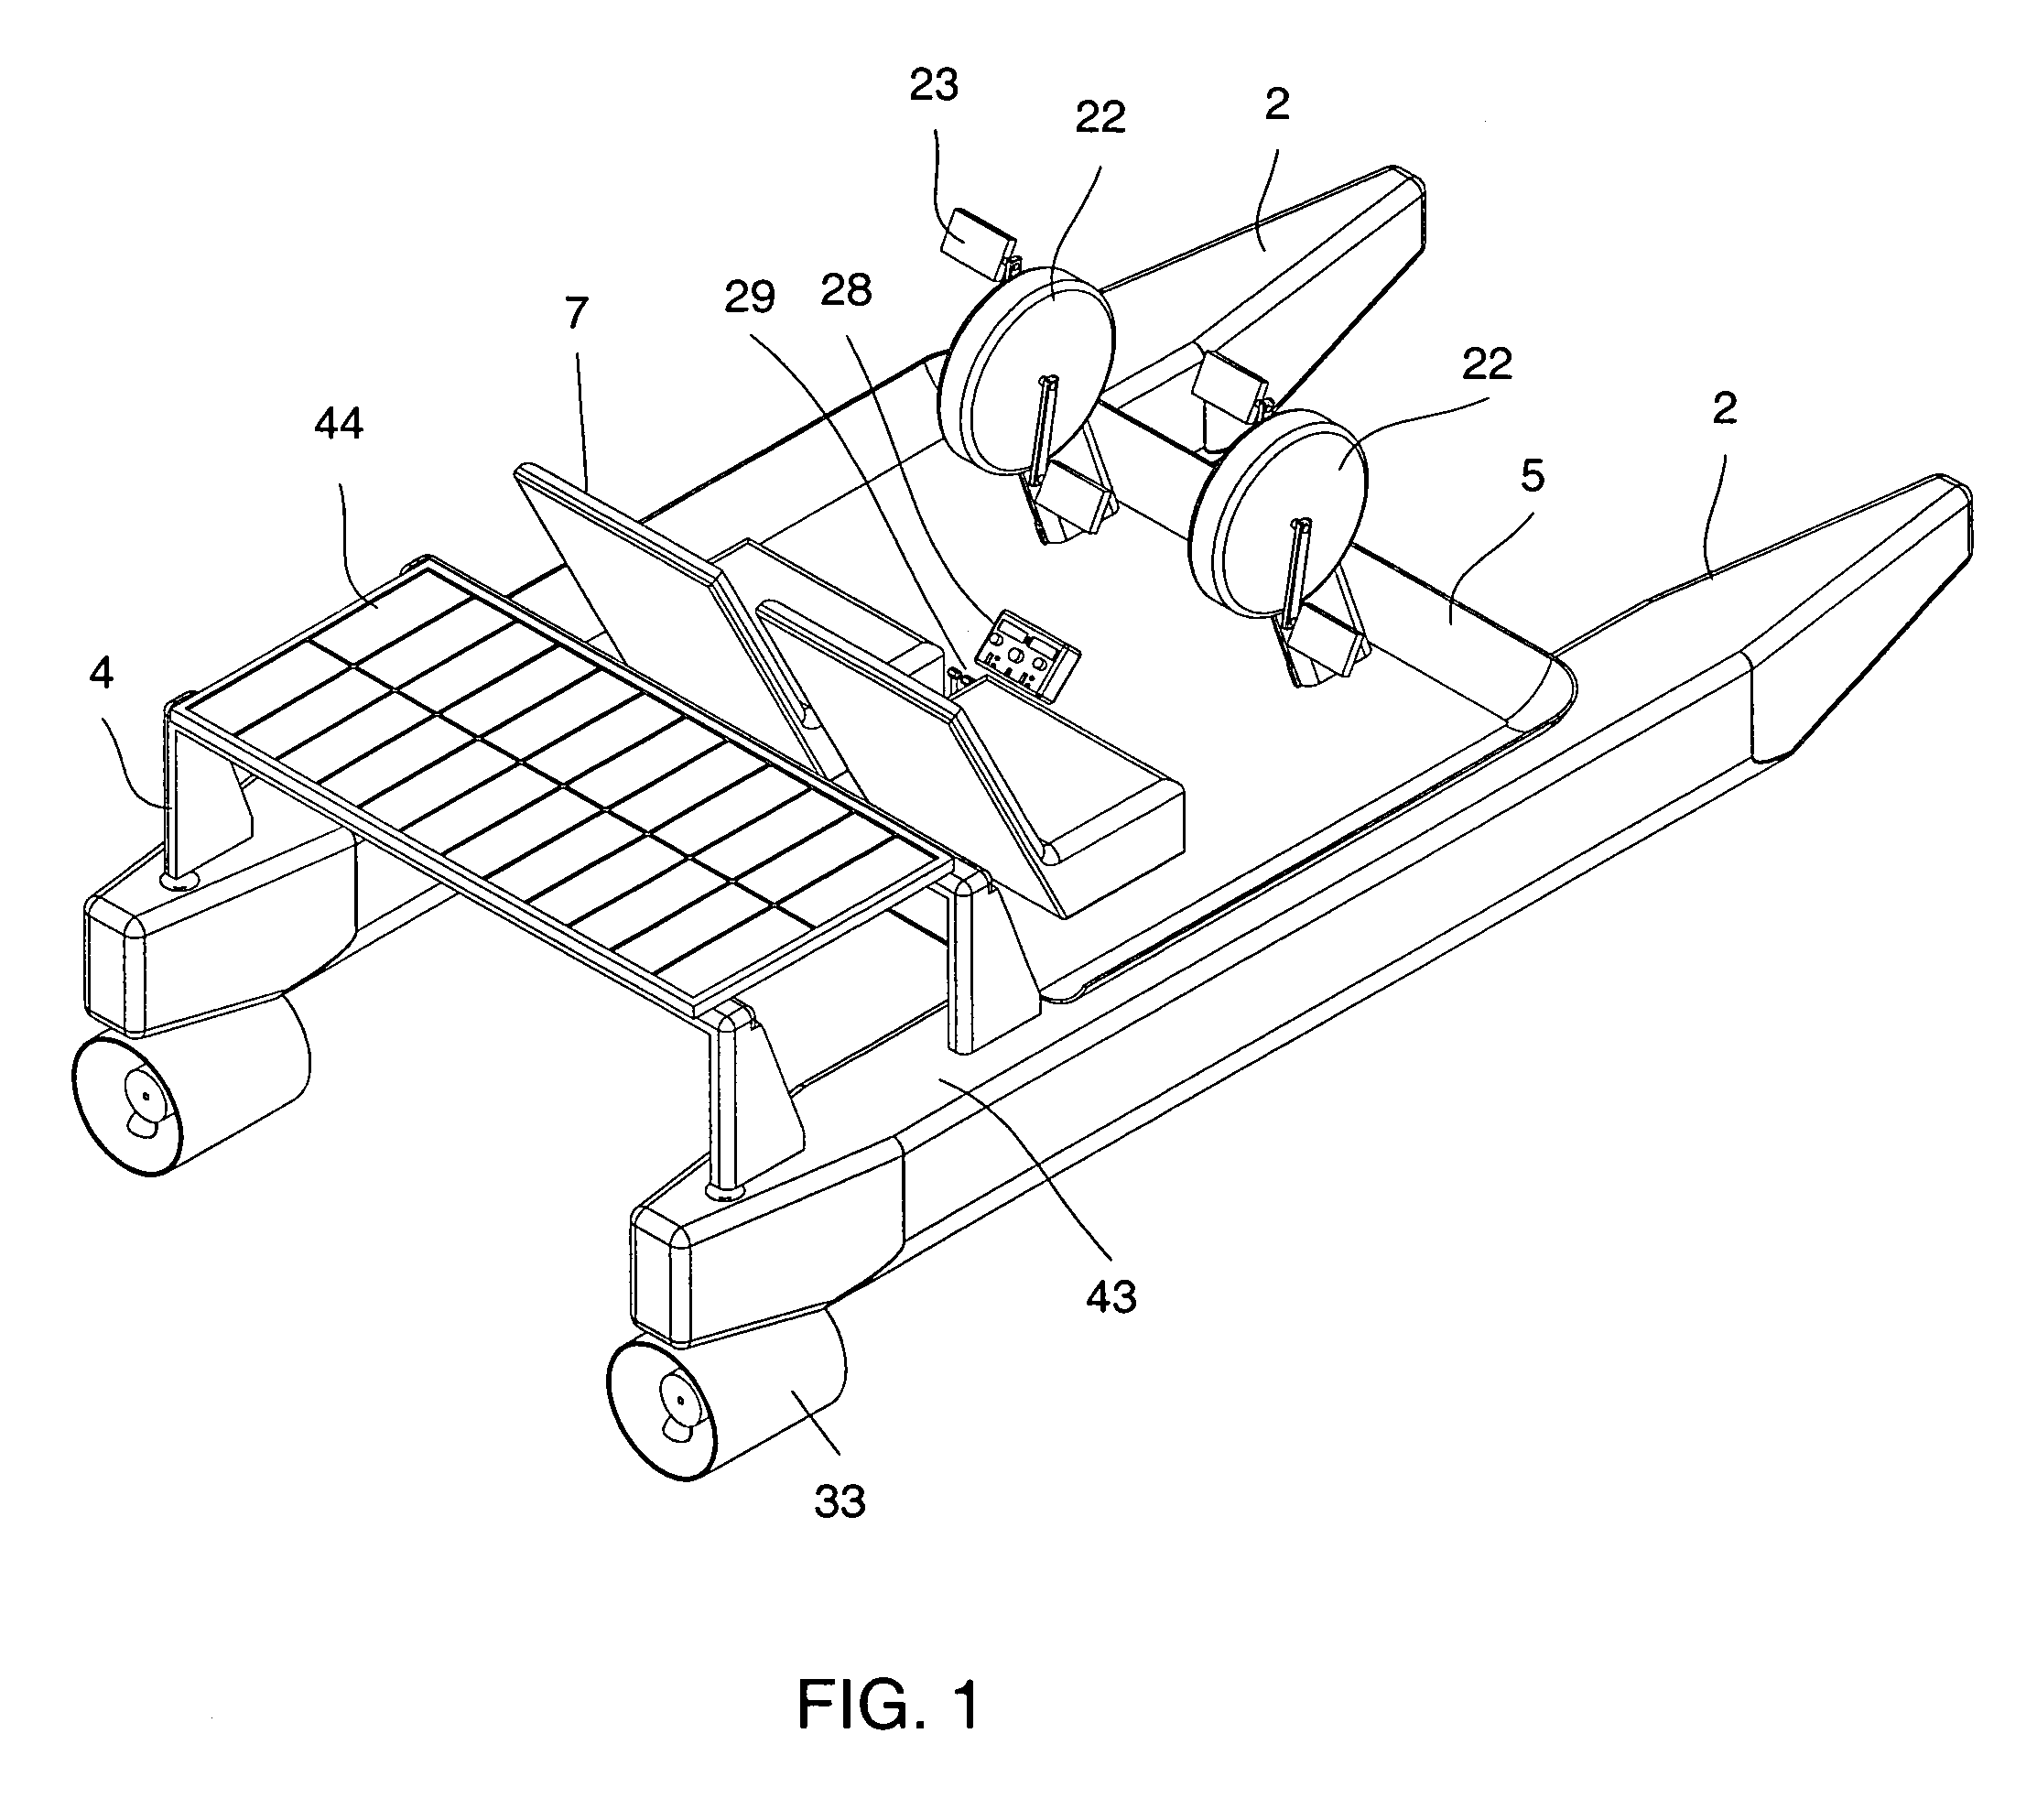 Human-powered generator system with active inertia and simulated vehicle